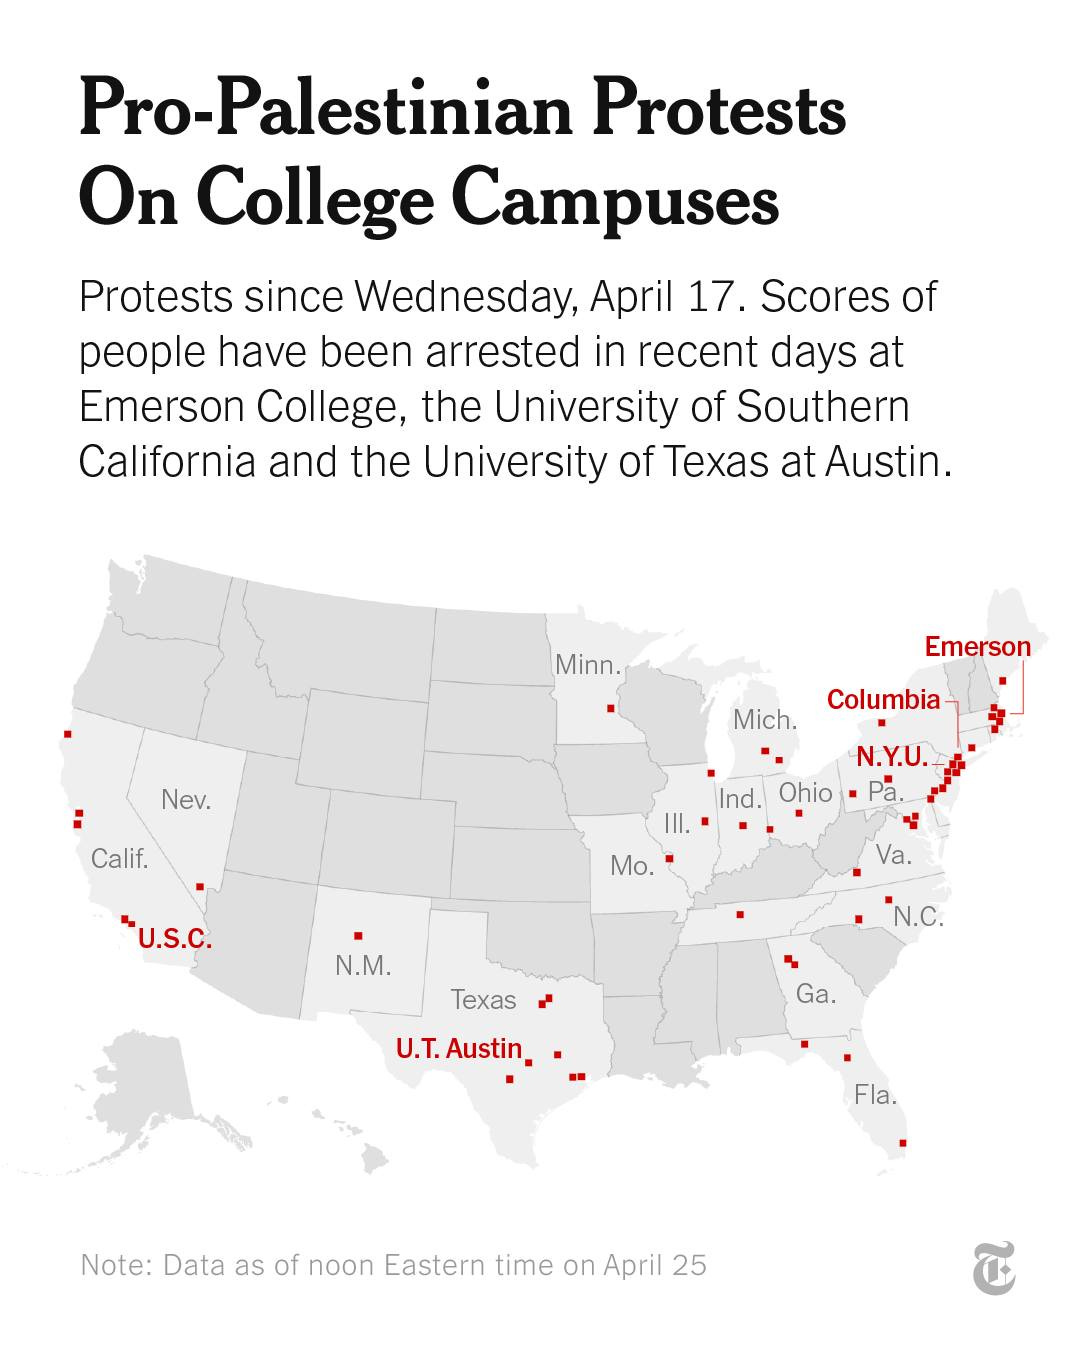 May be an image of map and text that says 'Pro-Palestinian Pro- Protests On College Campuses Protests since Wednesday, April 17. Scores of people have been arrested in recent days at Emerson College, the University of Southern California and the University of Texas at Austin. Minn. Nev. Emerson Mich. Columbia Calif. N.Y.U. Ind. Ohio P. III. U.S.C. Mo. Va. N.M. "N.C Texas U.T.Austin. U.T. Austin, Ga. Fla. Fl Note: Data as of noon Eastern time on April 25'